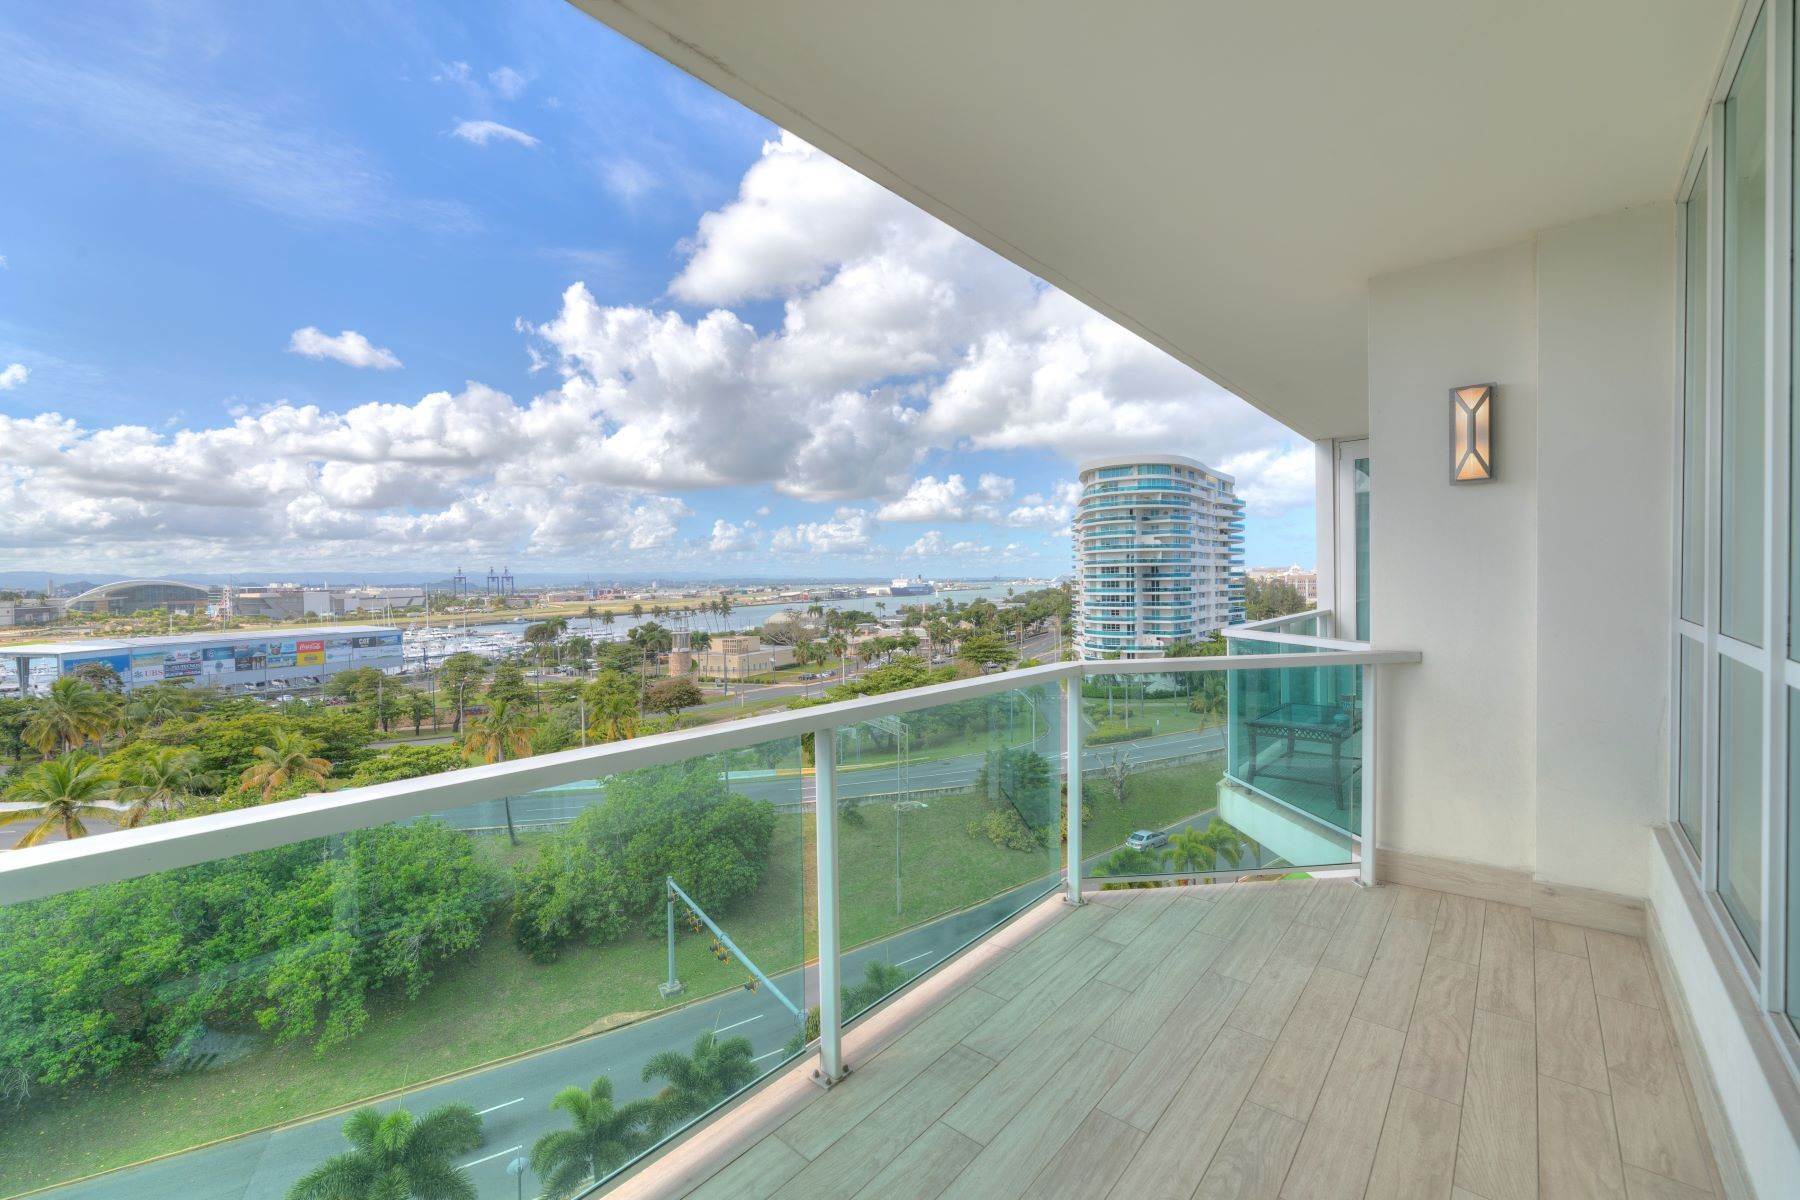 4. Condominiums for Sale at Modern Residence with Spectacular Views 25 Munoz Rivera Ave., Apt. 808 San Juan, 00901 Puerto Rico